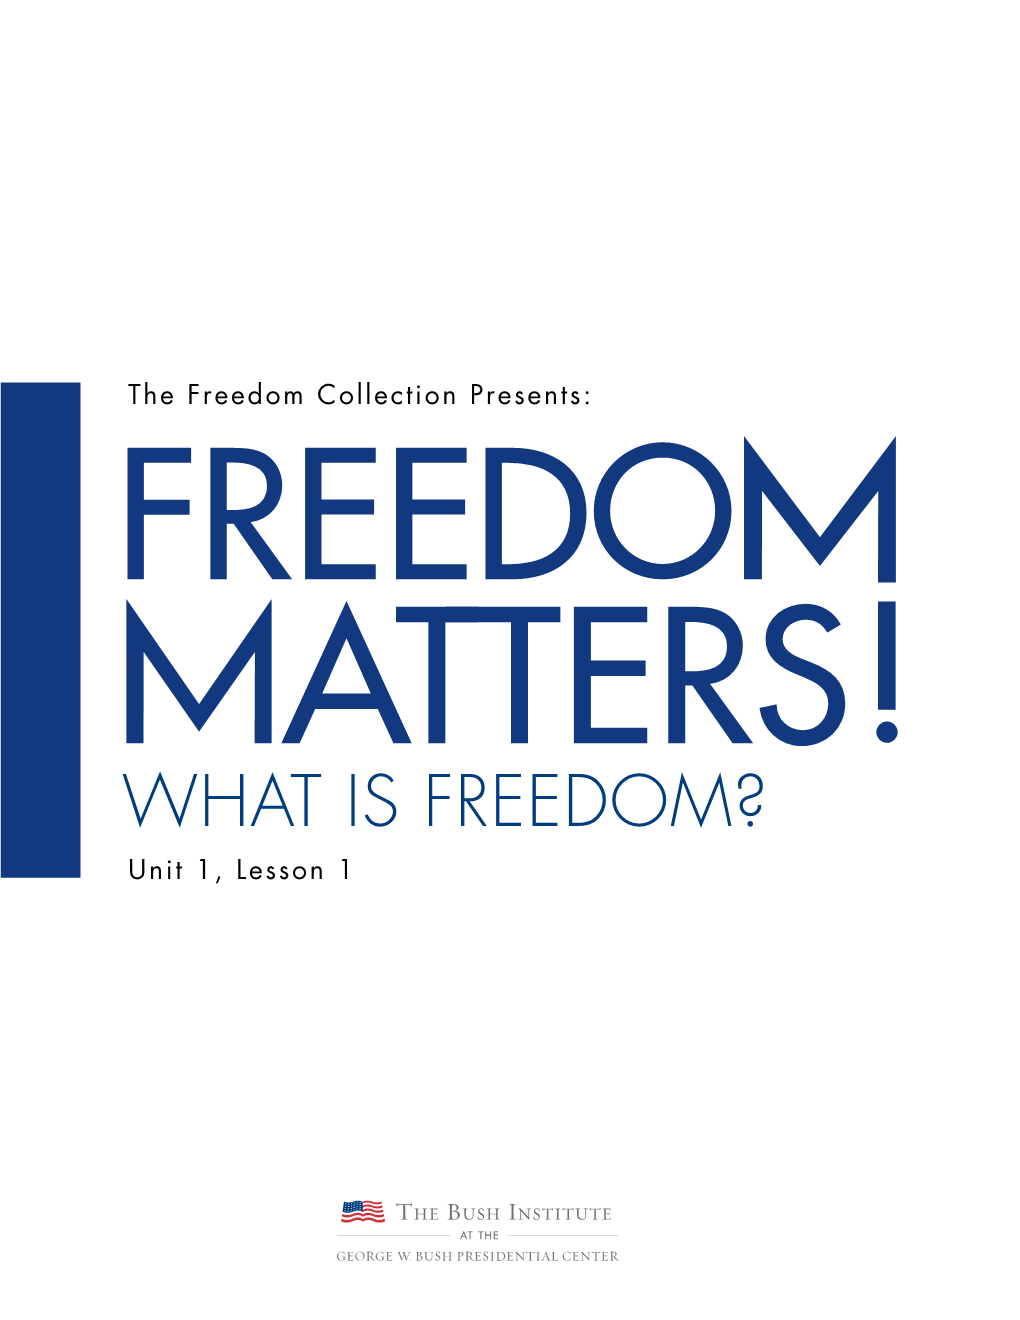 WHAT IS FREEDOM? Unit 1, Lesson 1 UNIT 1, LESSON 1 WHAT IS FREEDOM?